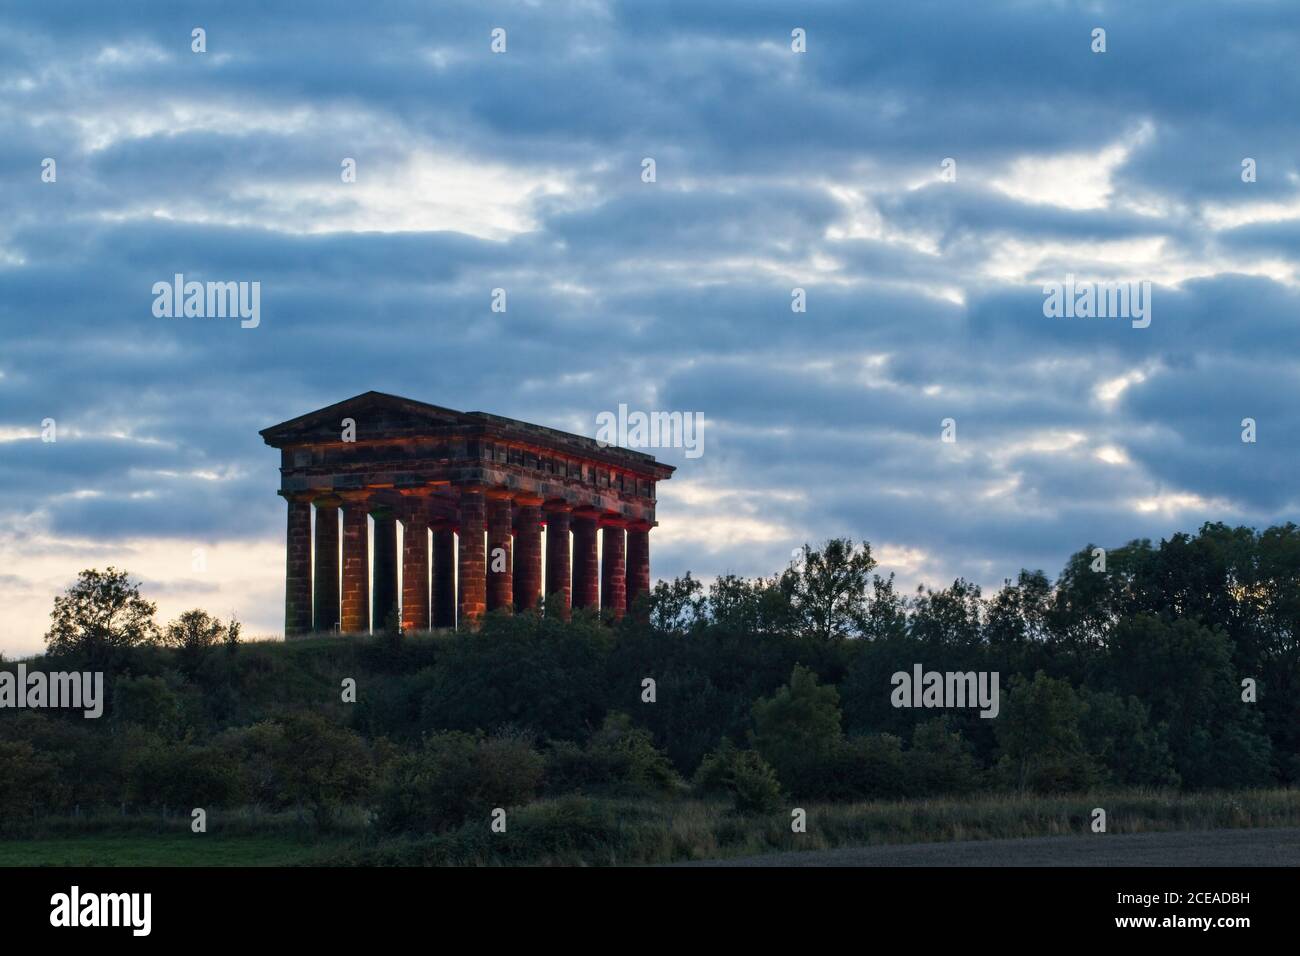 The landmark Earl of Durham Monument stands on a hilltop near Penshaw in County Durham. Image captured at dusk. Stock Photo